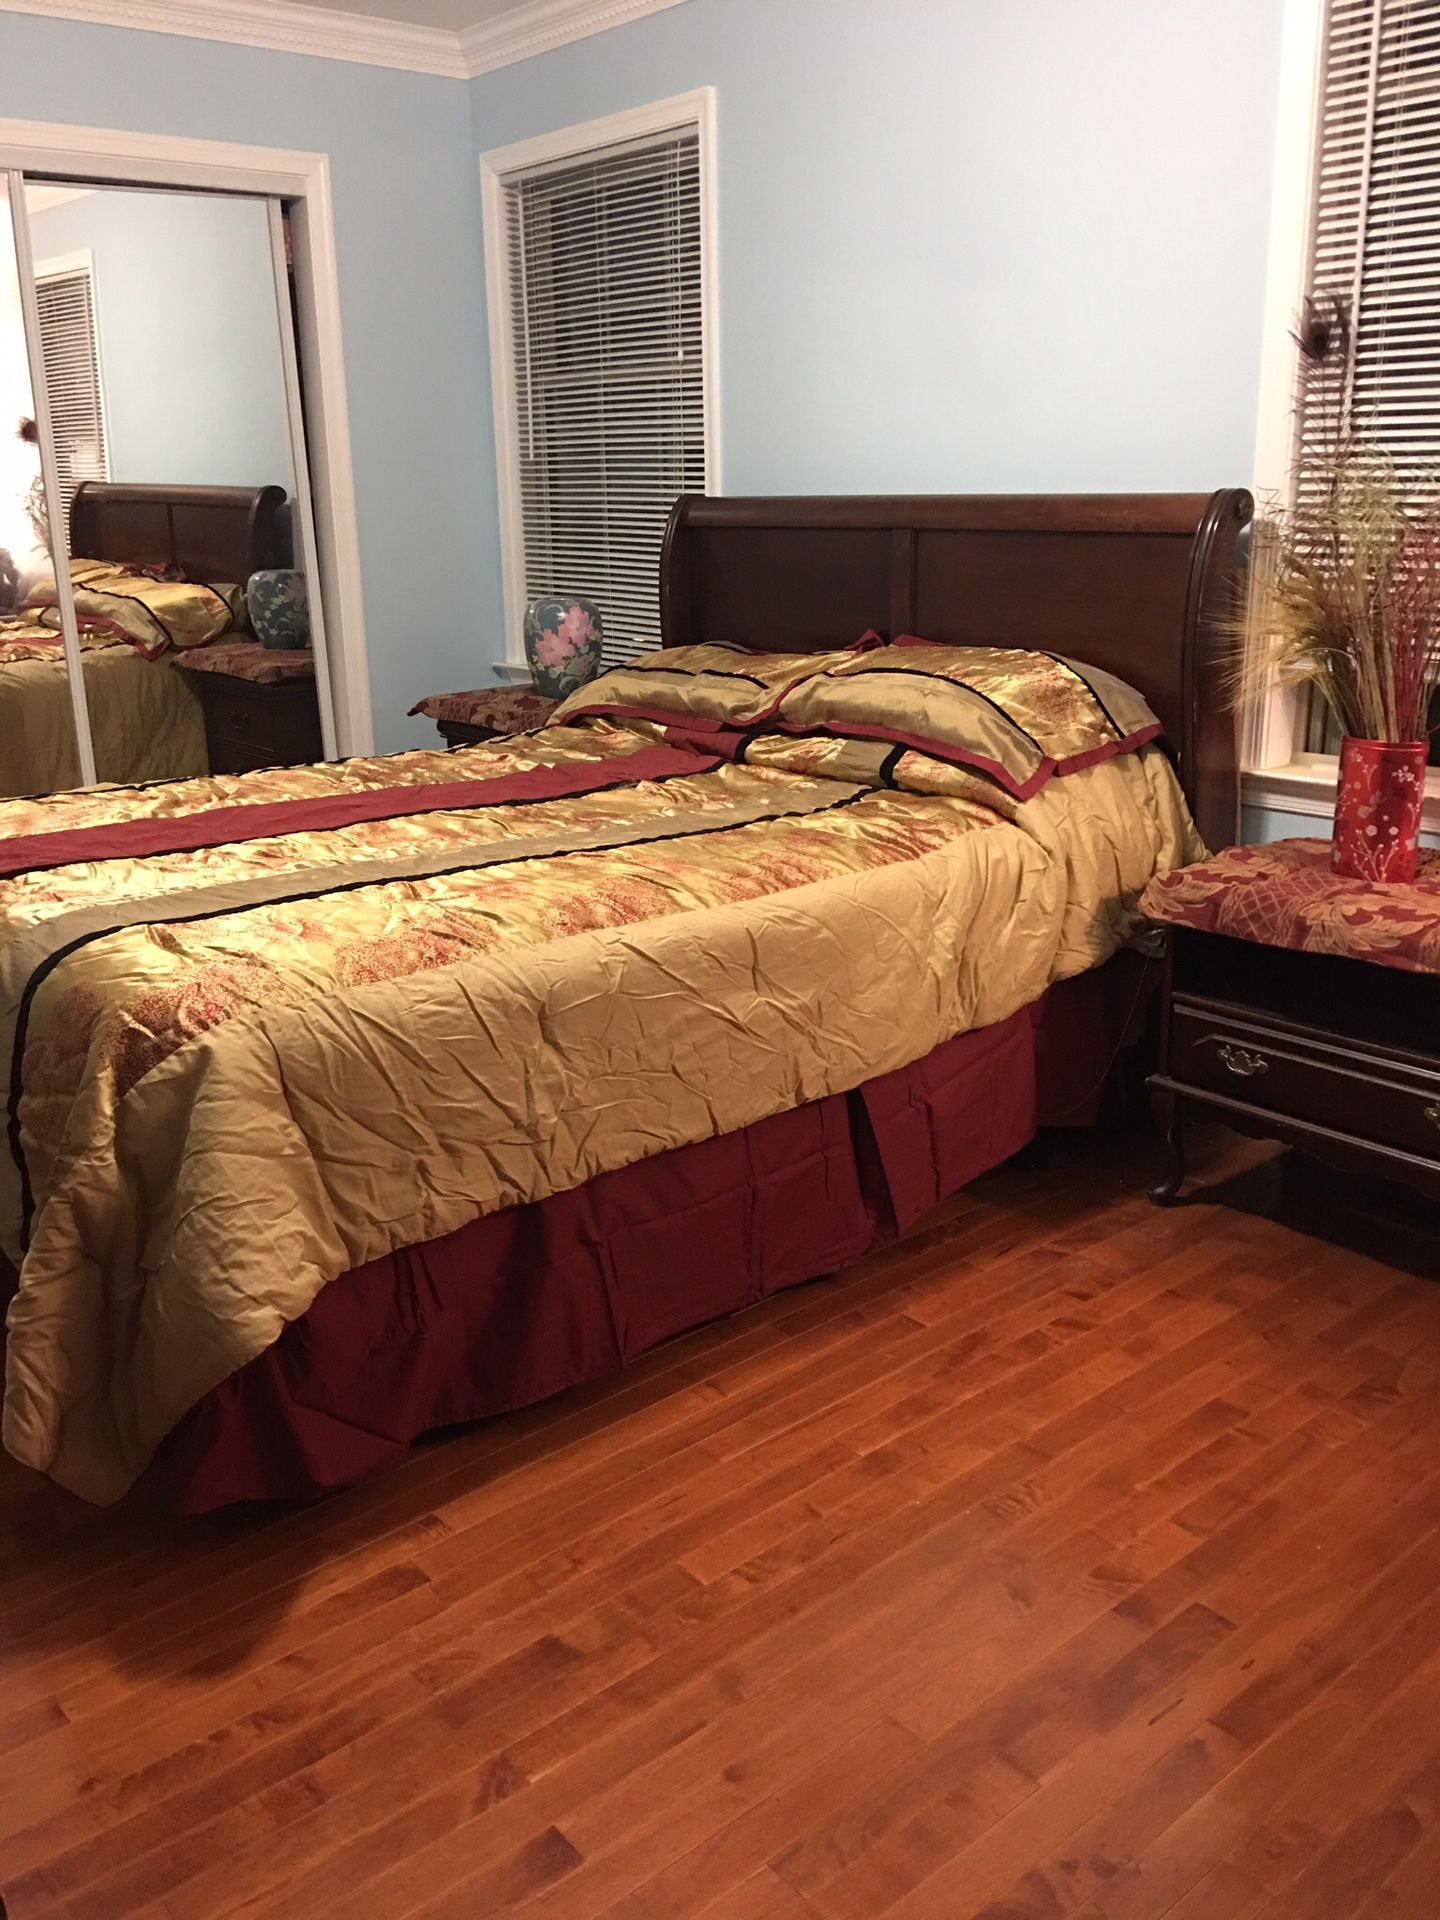 Sleigh Queen bed w/double mattresses, headboard/footboard and night table